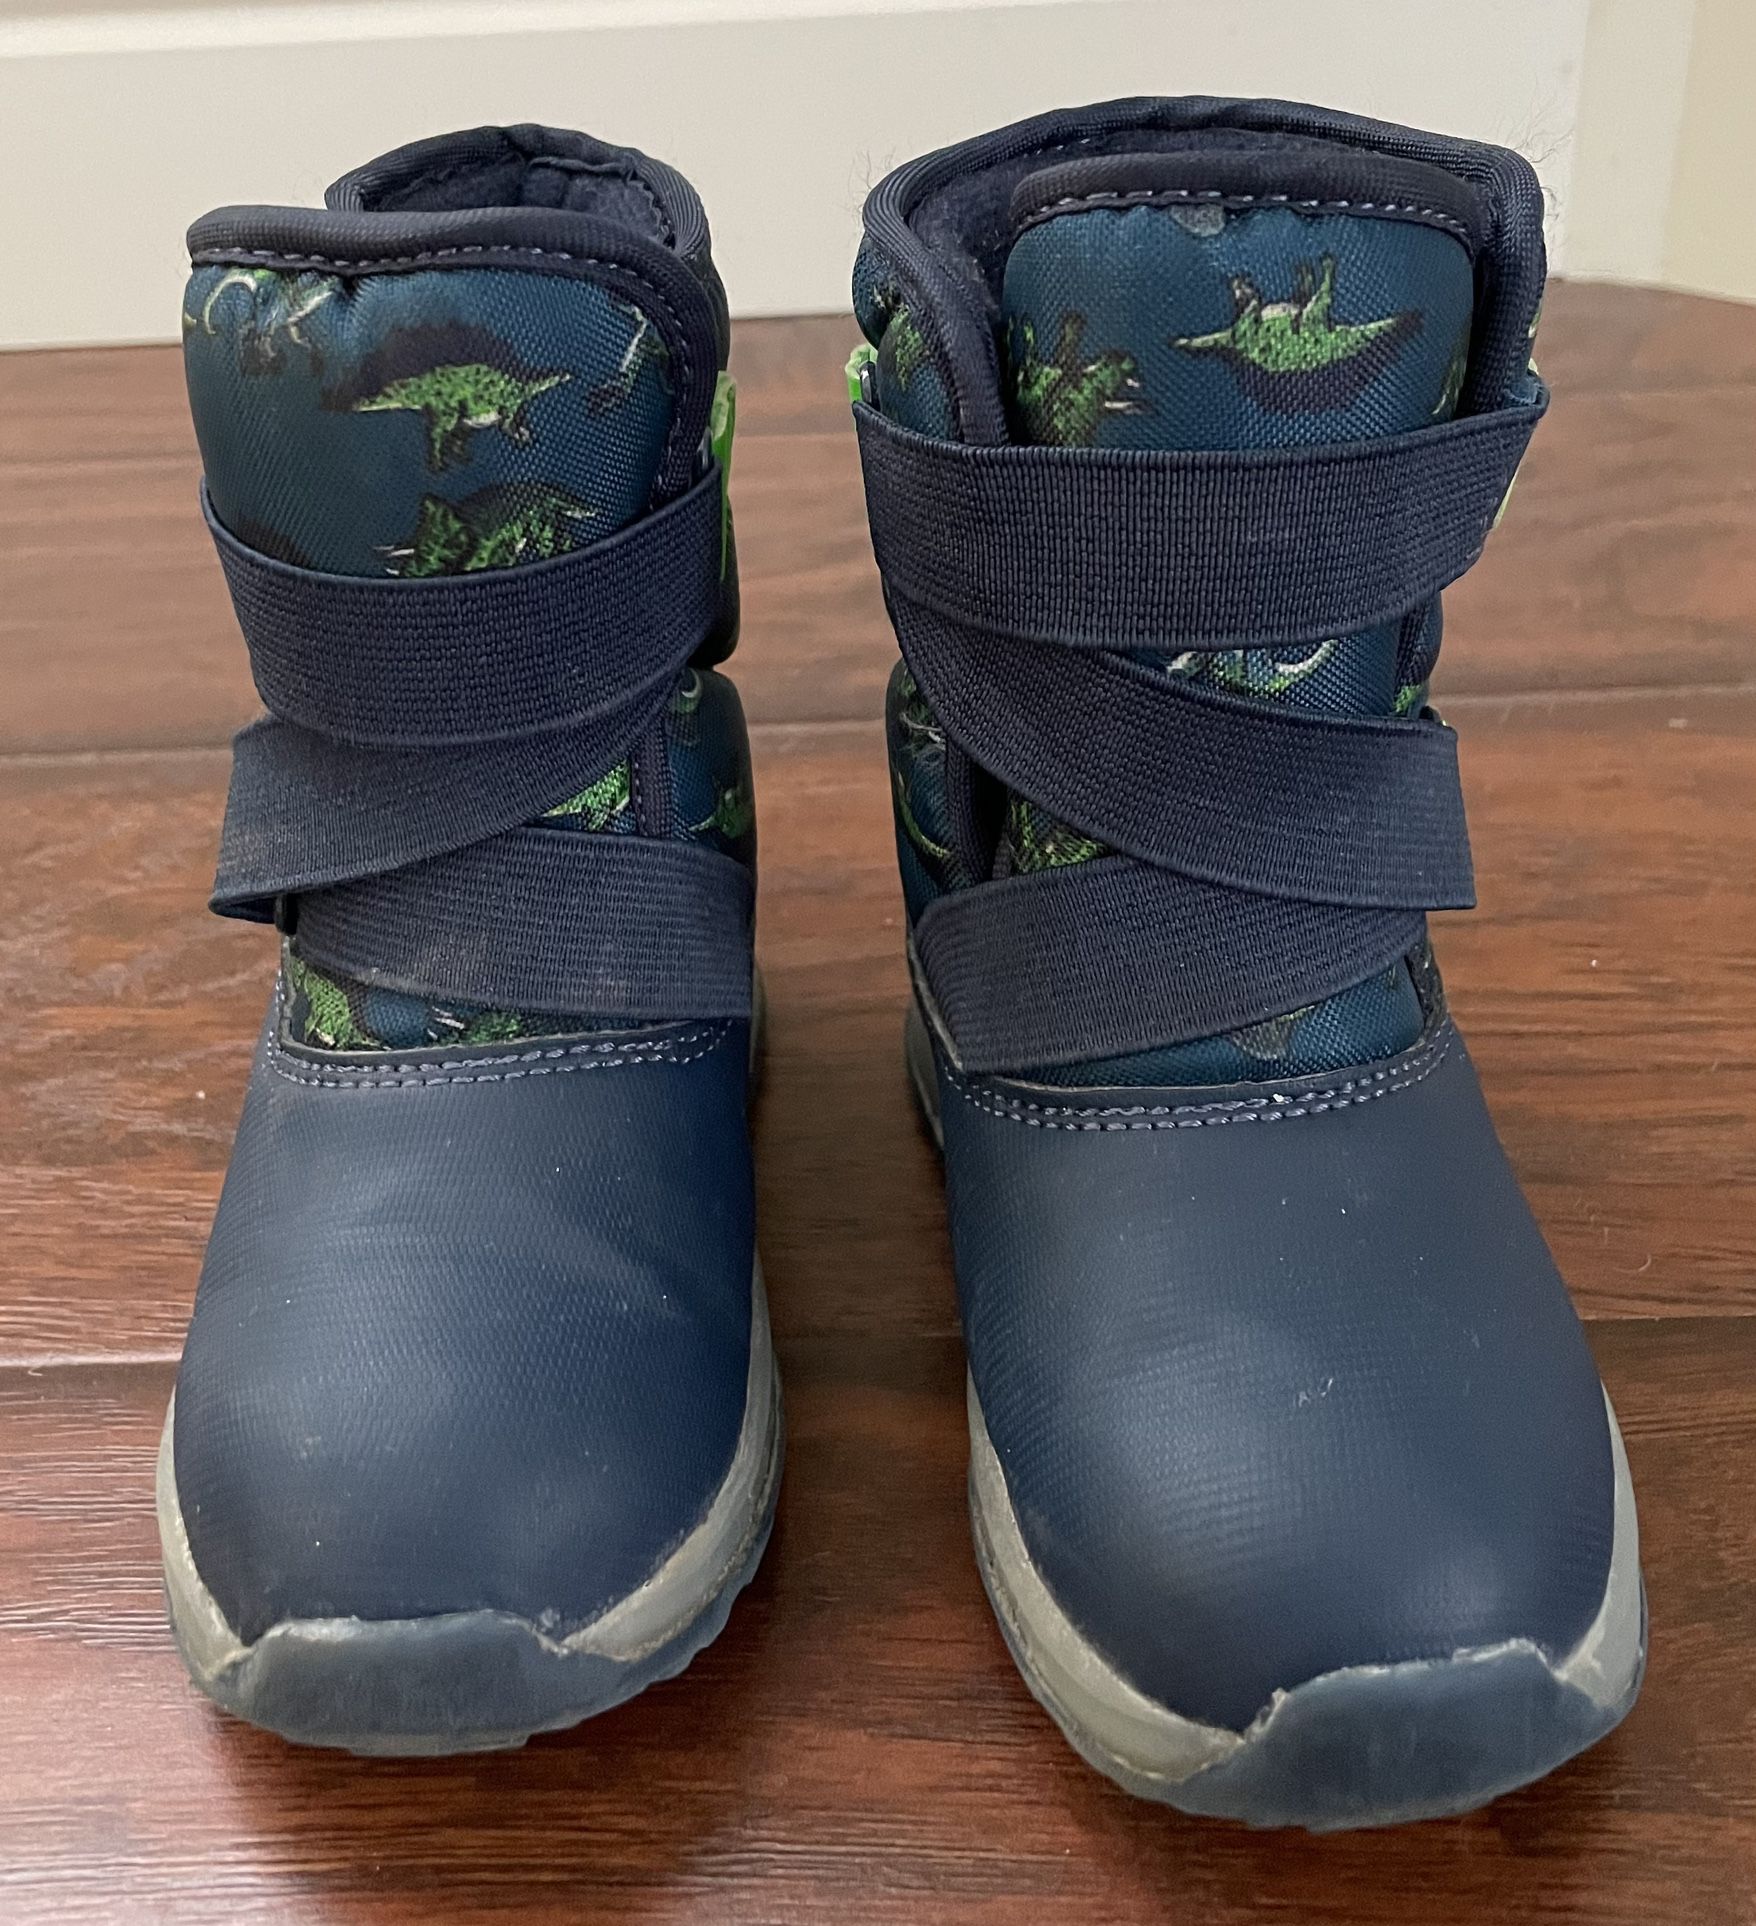 Snow boots For Toddlers